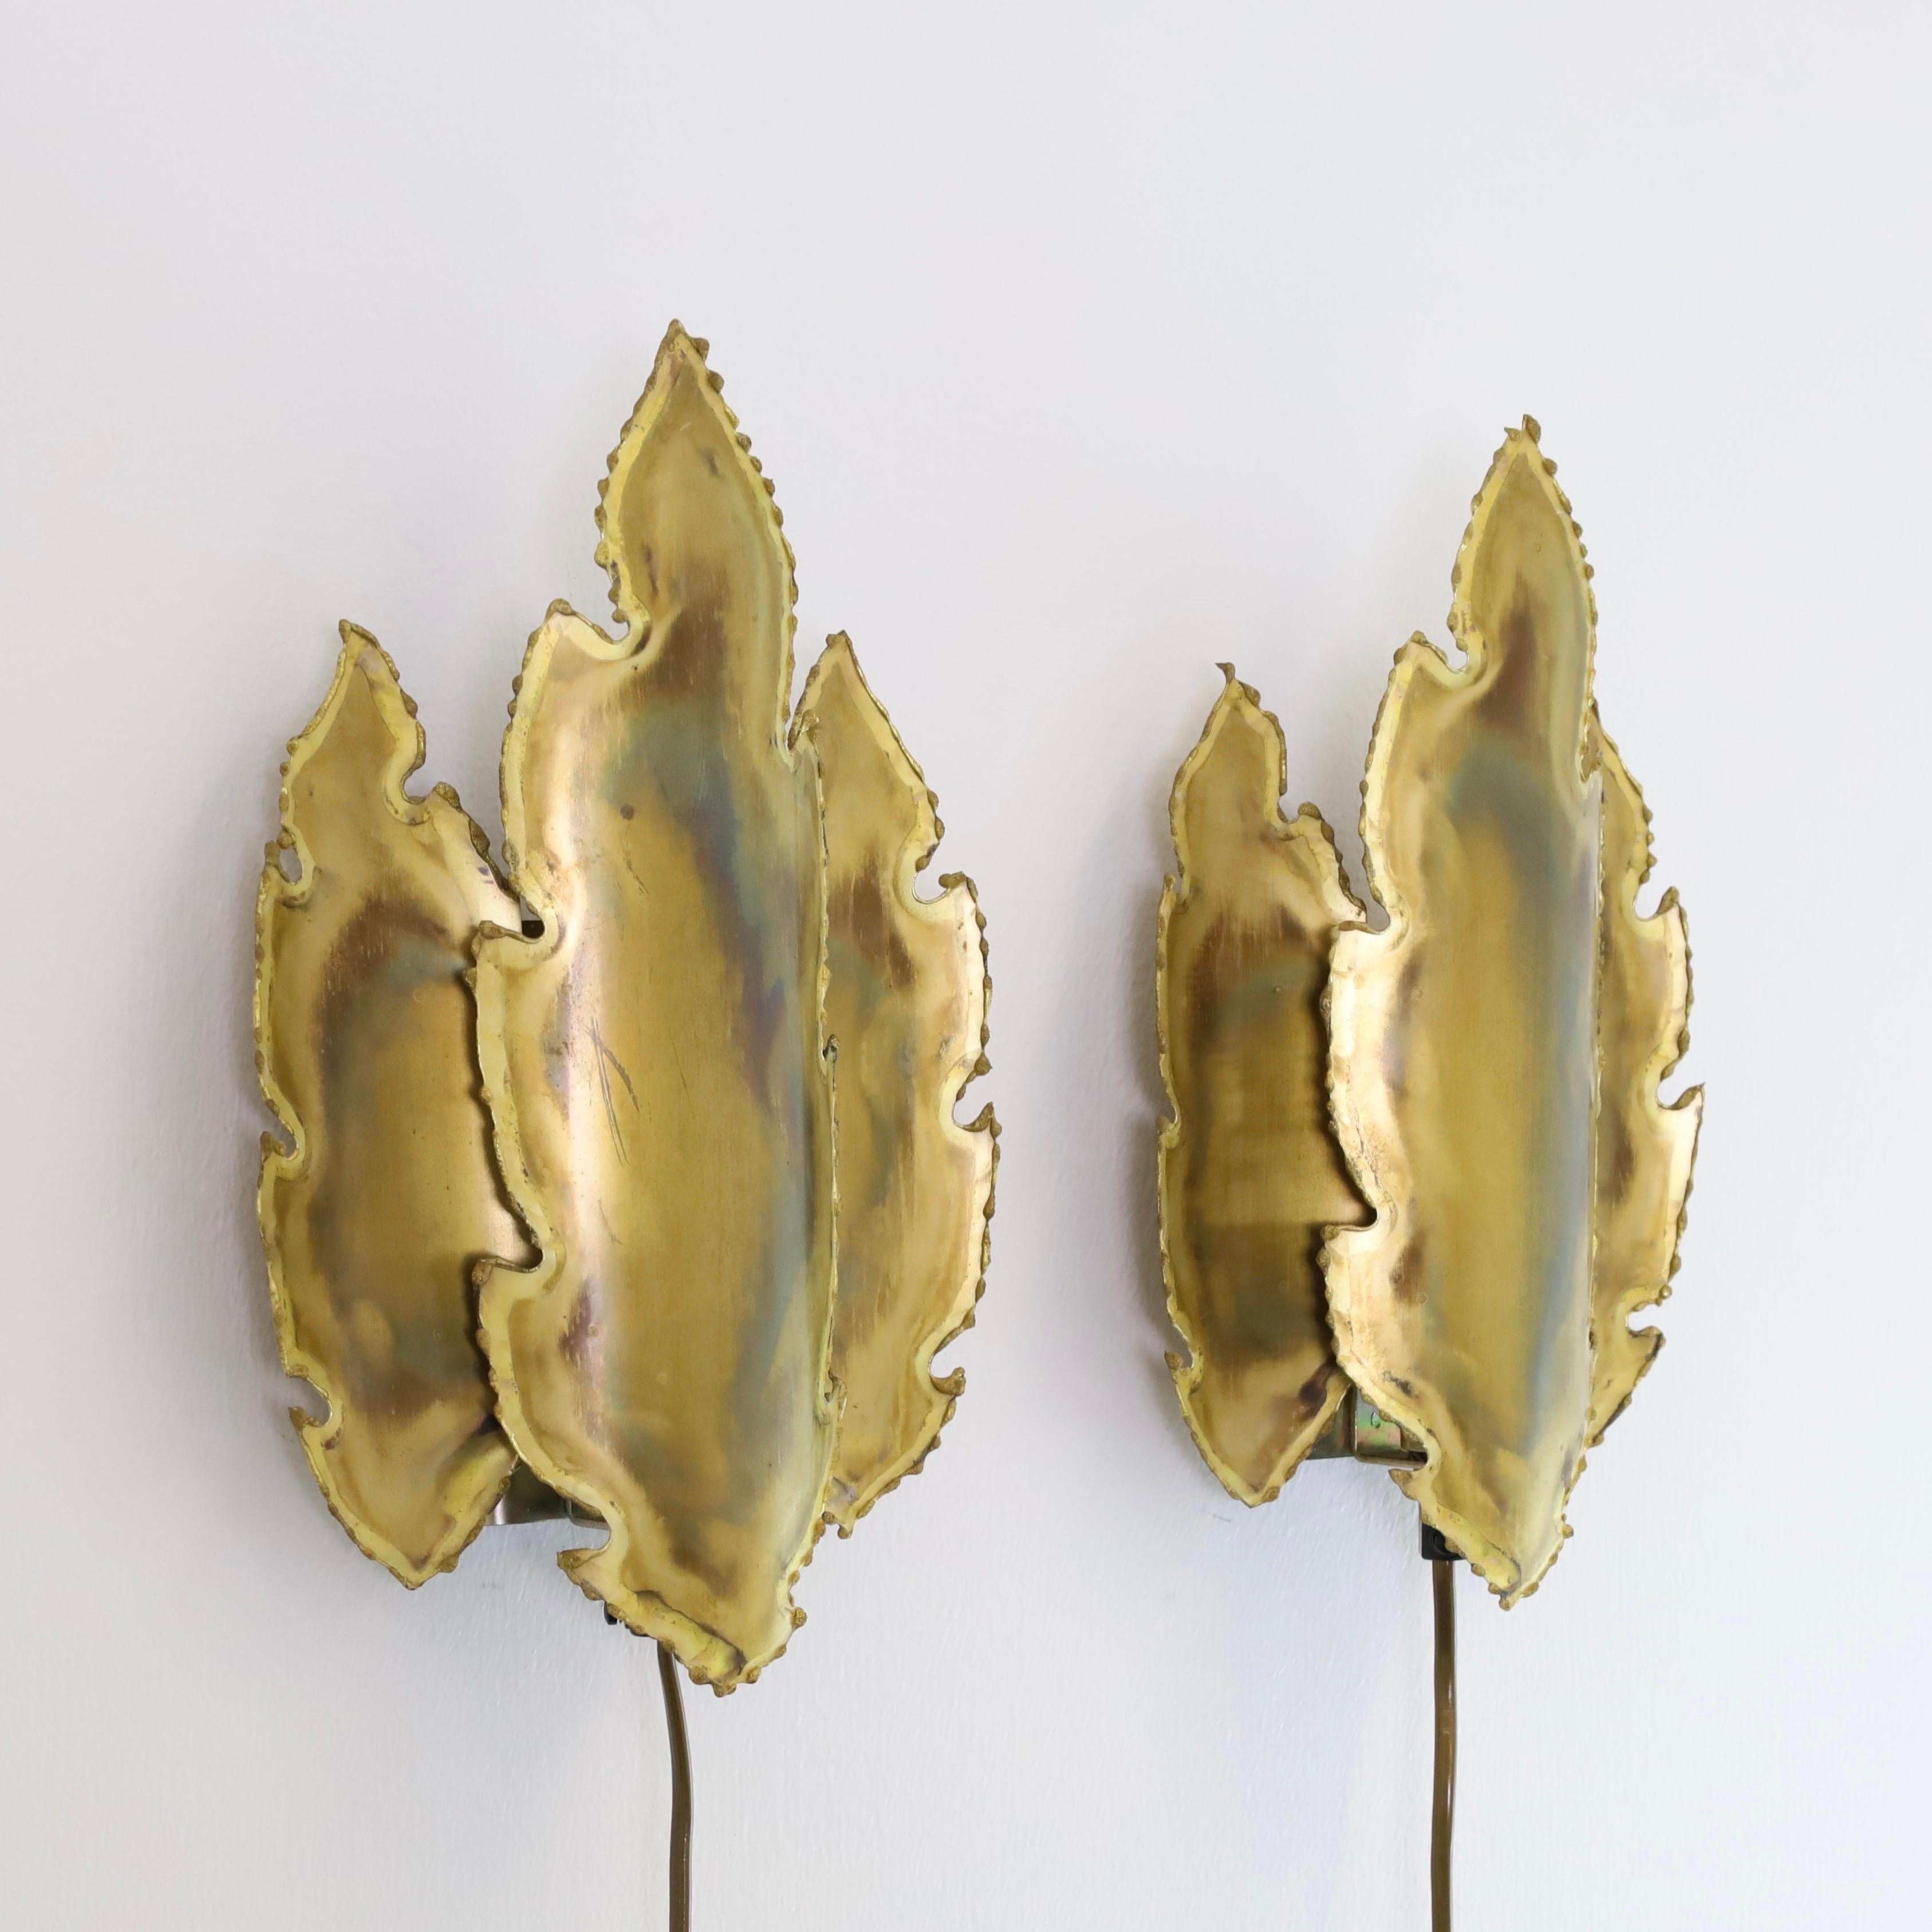 Danish Pair of Leaf-Shaped Brass Wall Lamps by Svend Aage Holm Sorensen, 1960s, Denmark For Sale